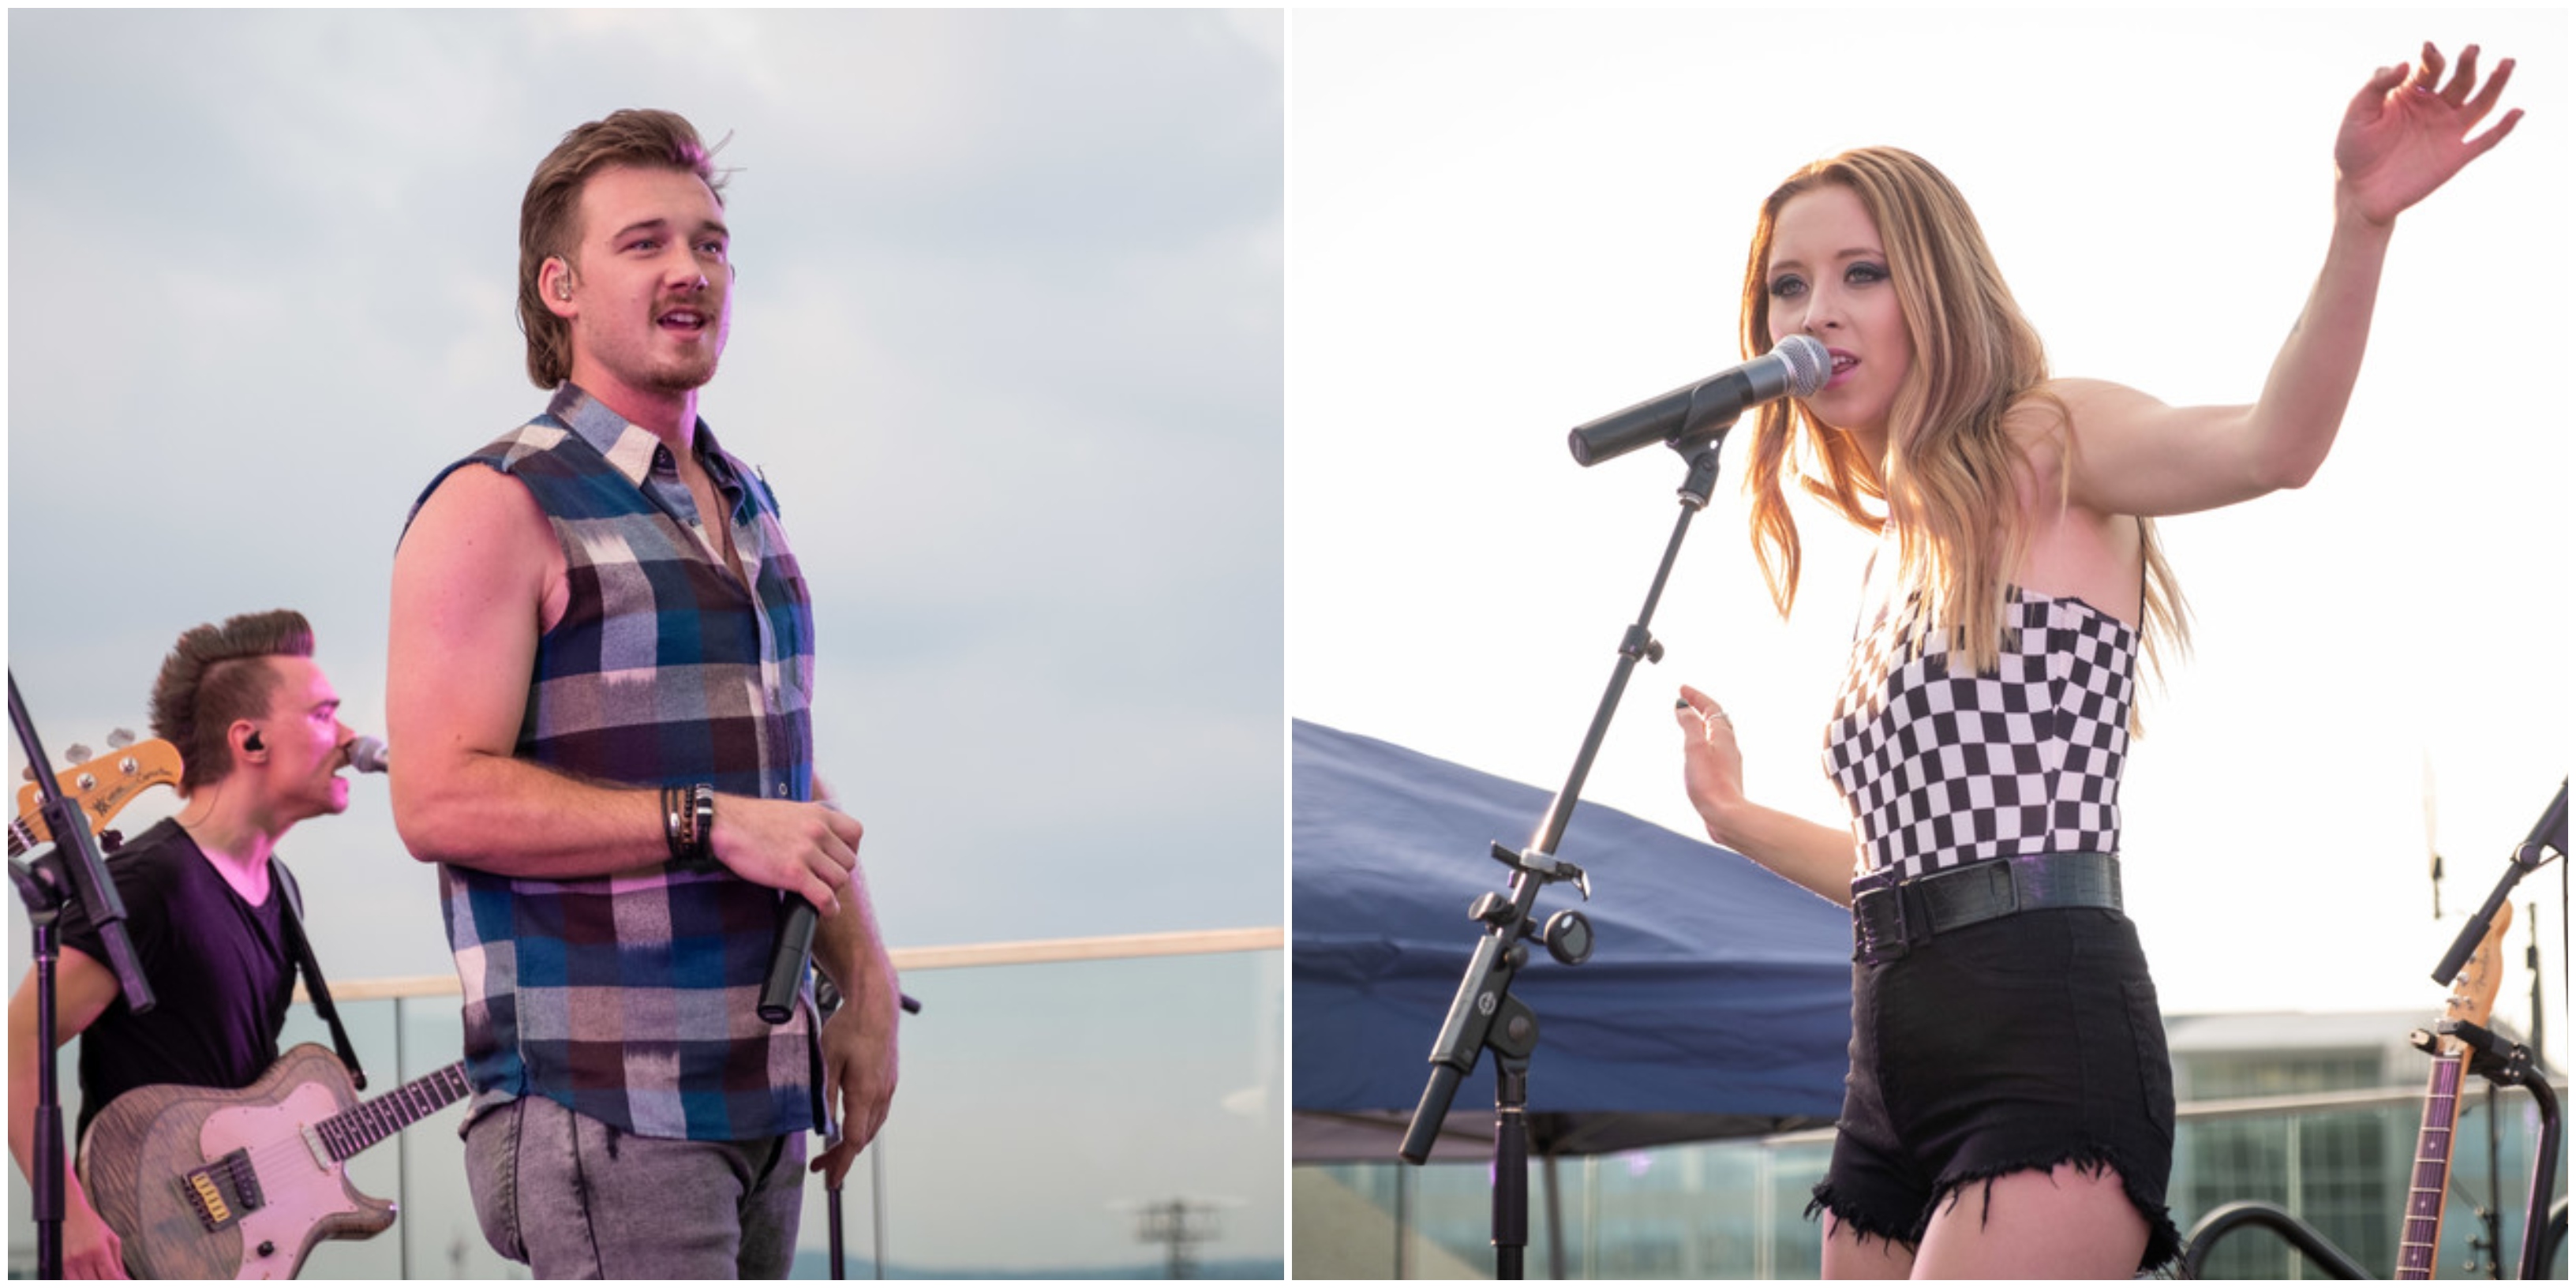 Morgan Wallen & Kalie Shorr Rock BMI’s “Rooftop On The Row” with Special Performance